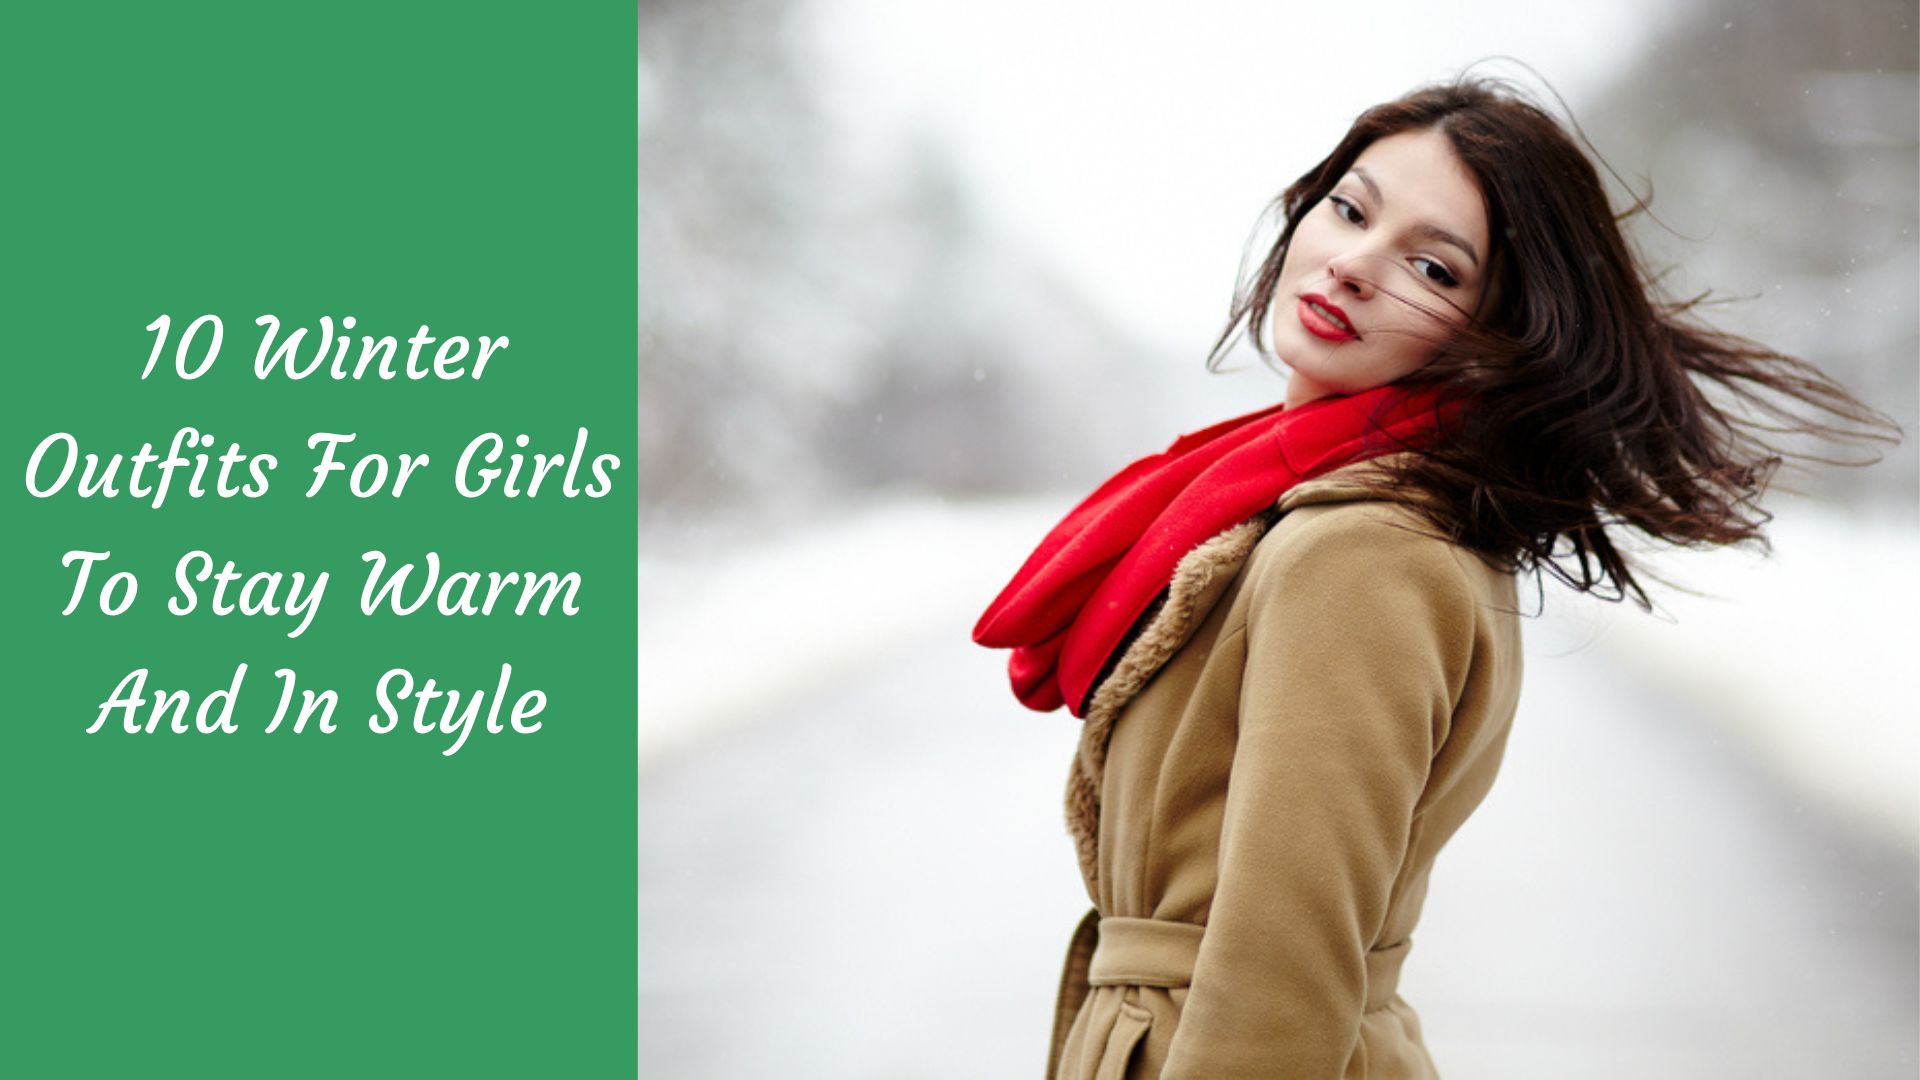 10 Winter Outfits For Girls To Stay Warm And In Style - The Kosha Journal